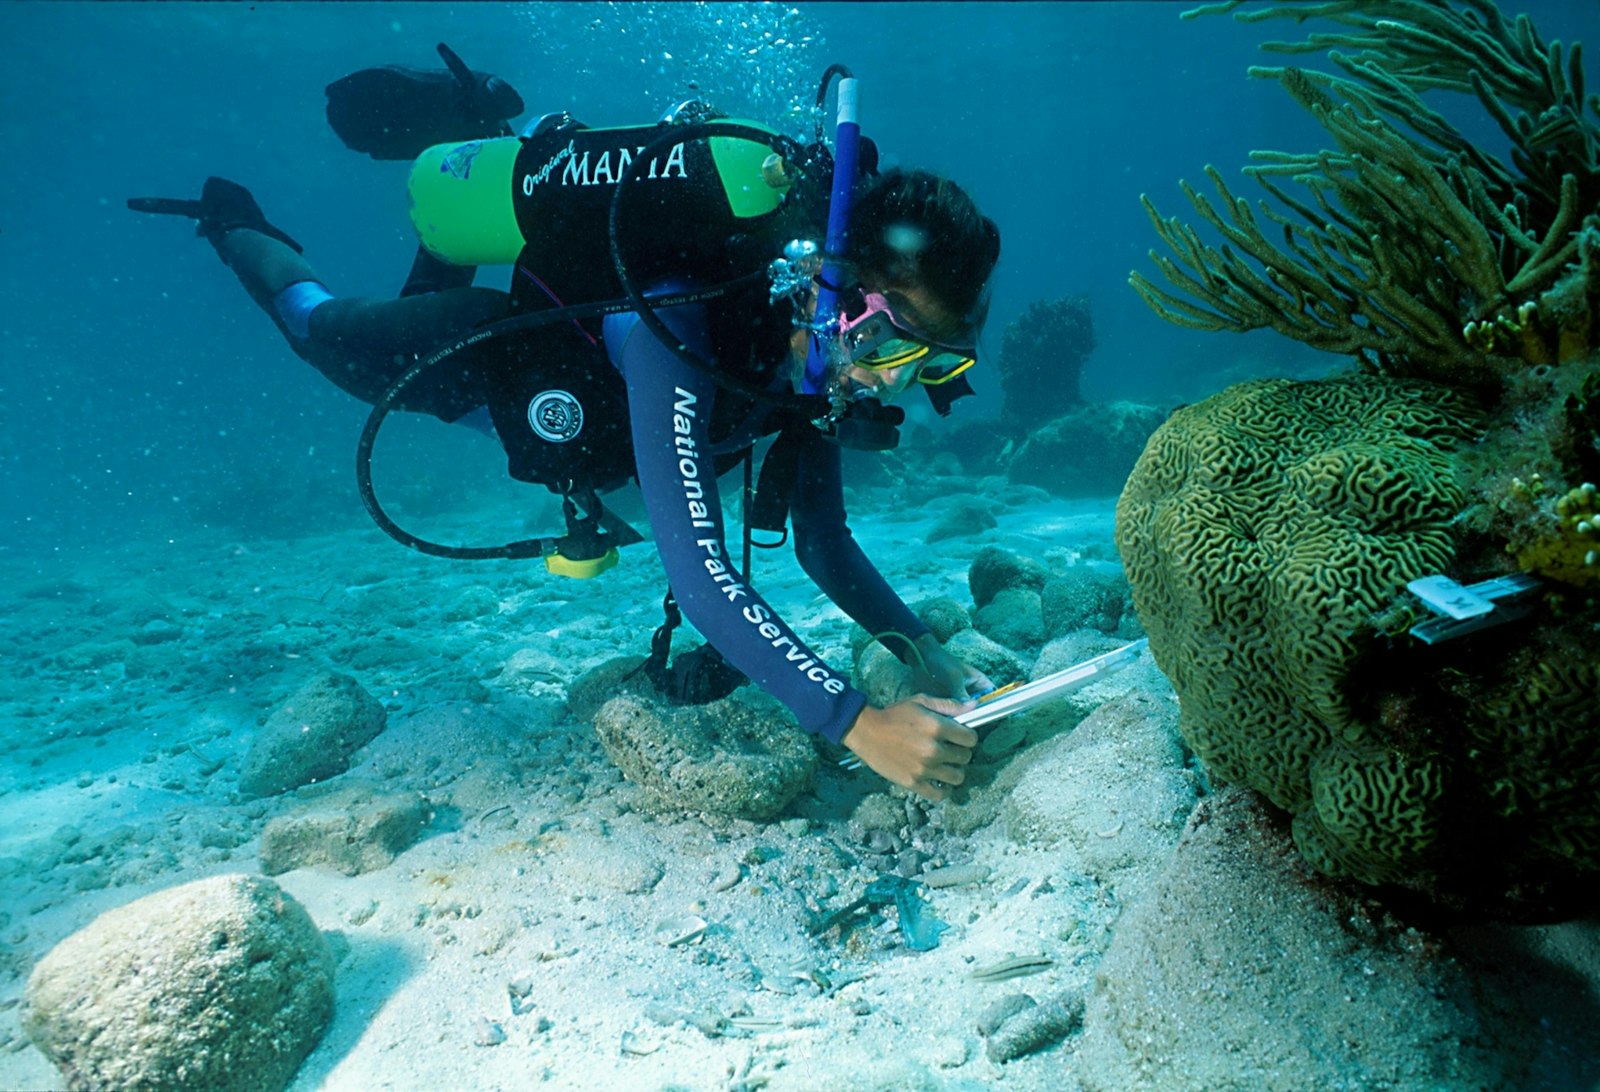 A person scuba diving takes a picture of coral underwater